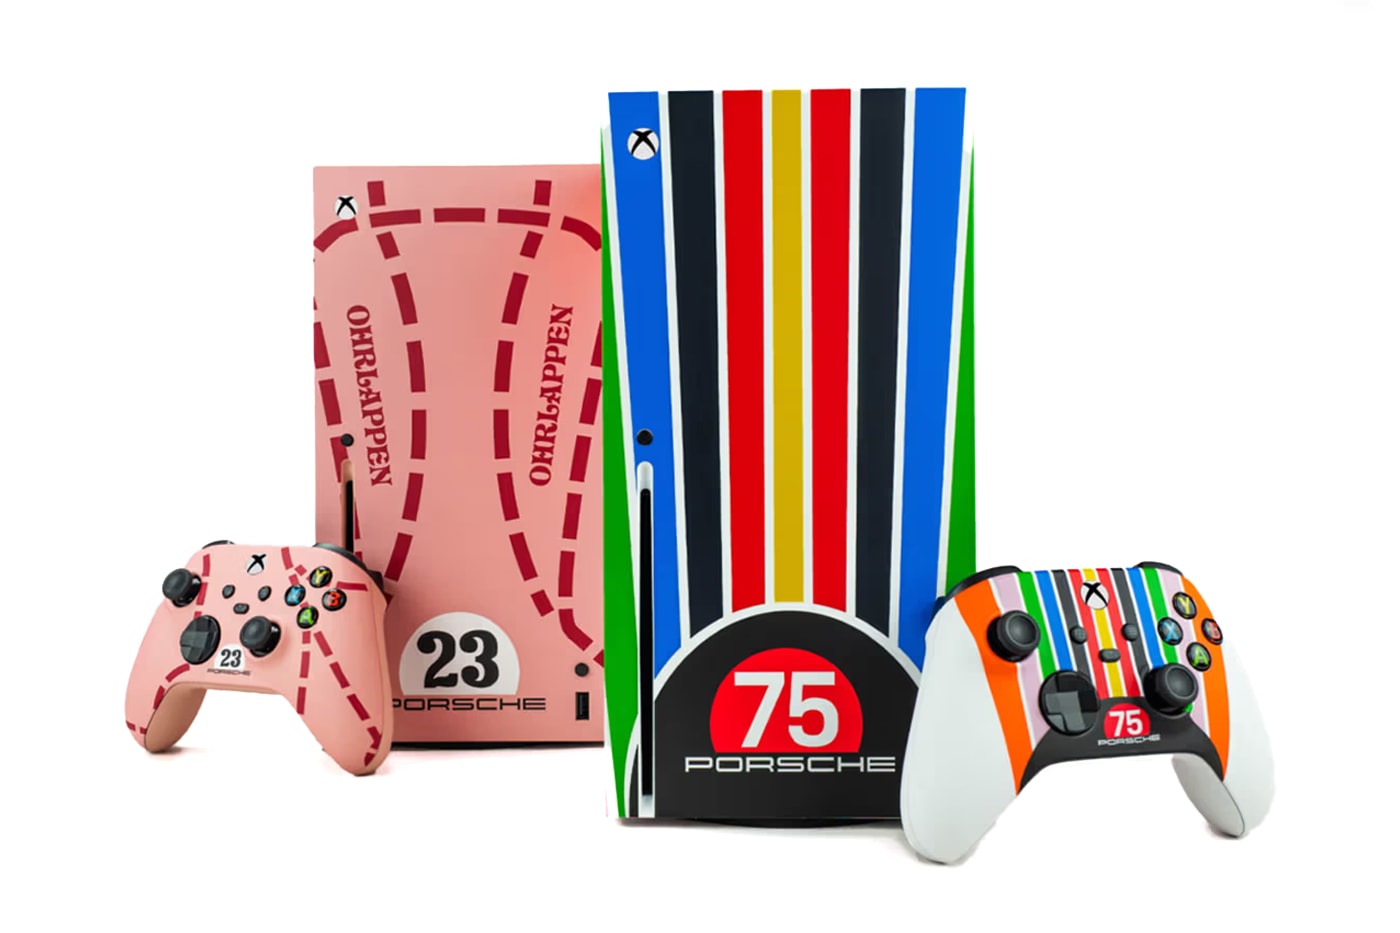 Porsche 75th Anniversary Famous Vehicles Cars Xbox Series X Consoles Controllers Contest Win Sweepstakes Deal Limited Edition